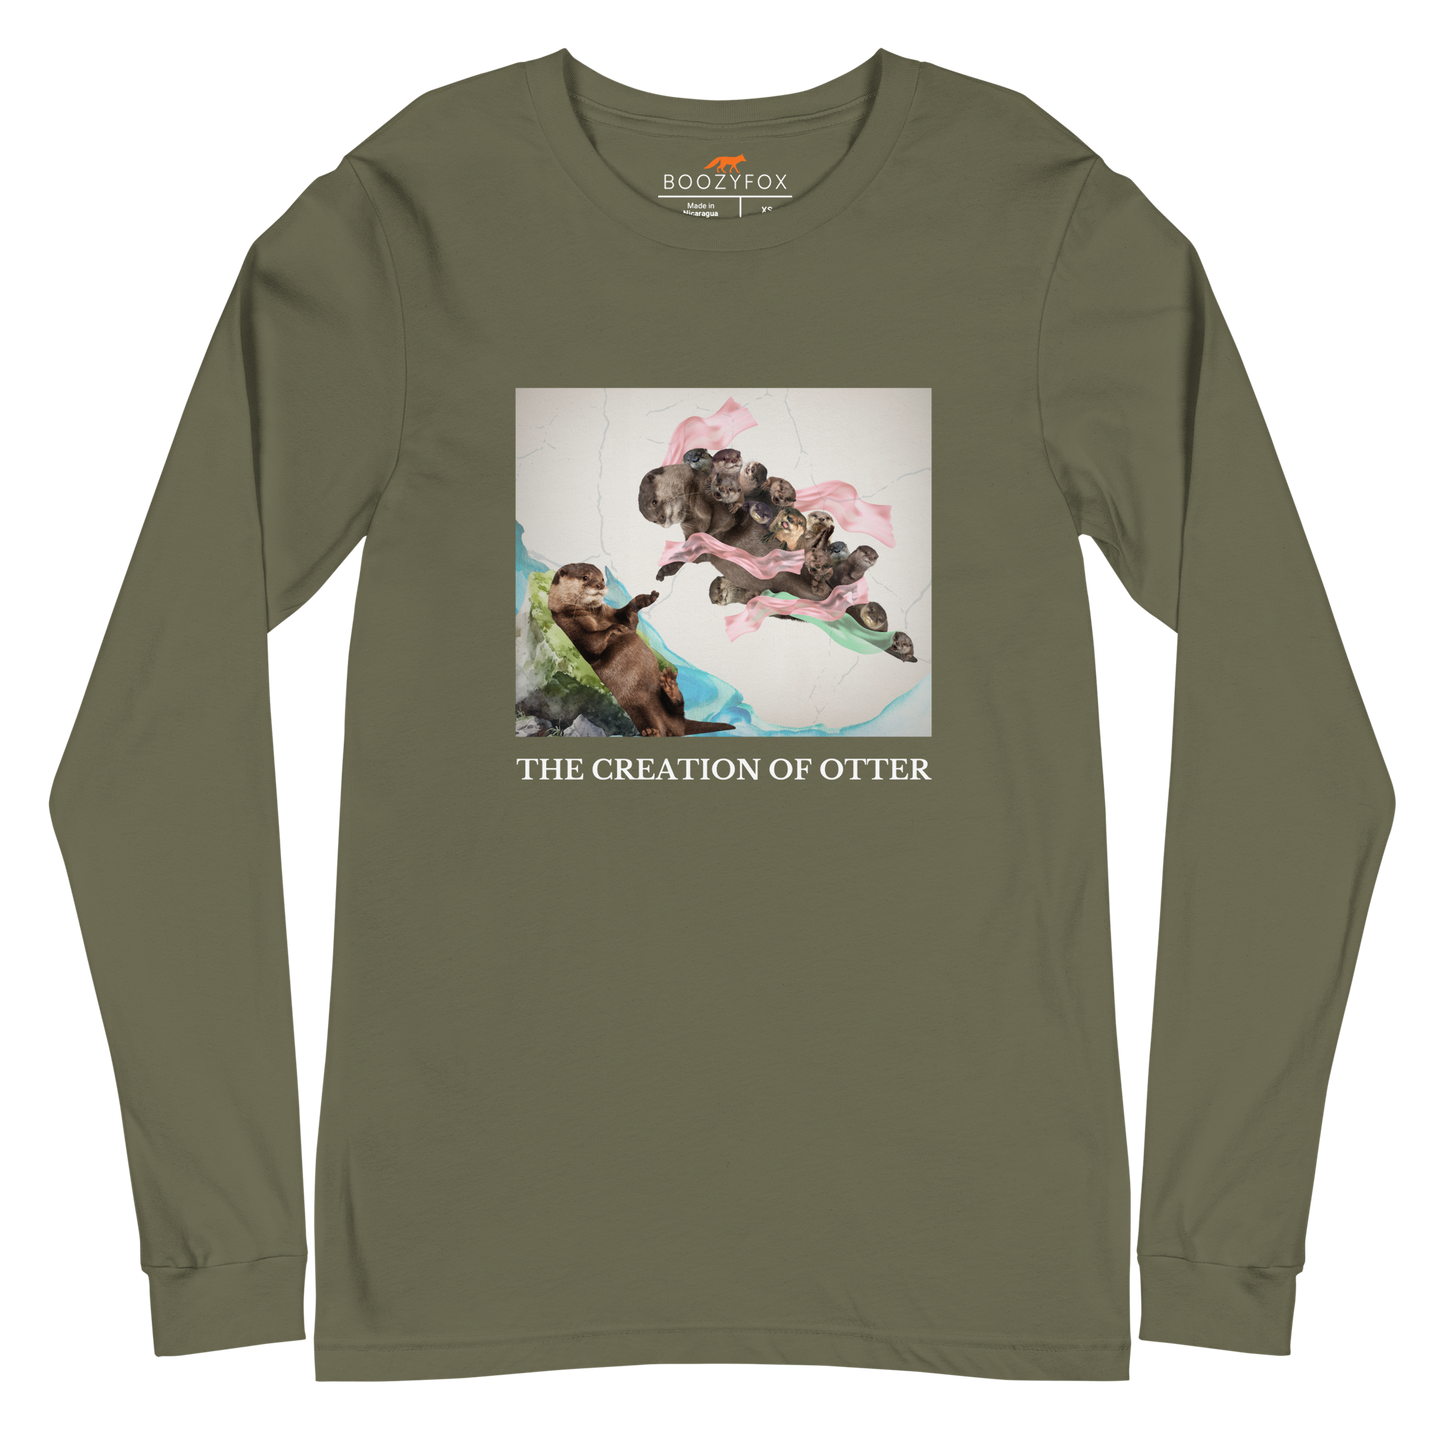 Military Green Otter Long Sleeve Tee featuring a playful The Creation of Otter parody of Michelangelo's masterpiece - Artsy/Funny Otter Long Sleeve Graphic Tees - Boozy Fox